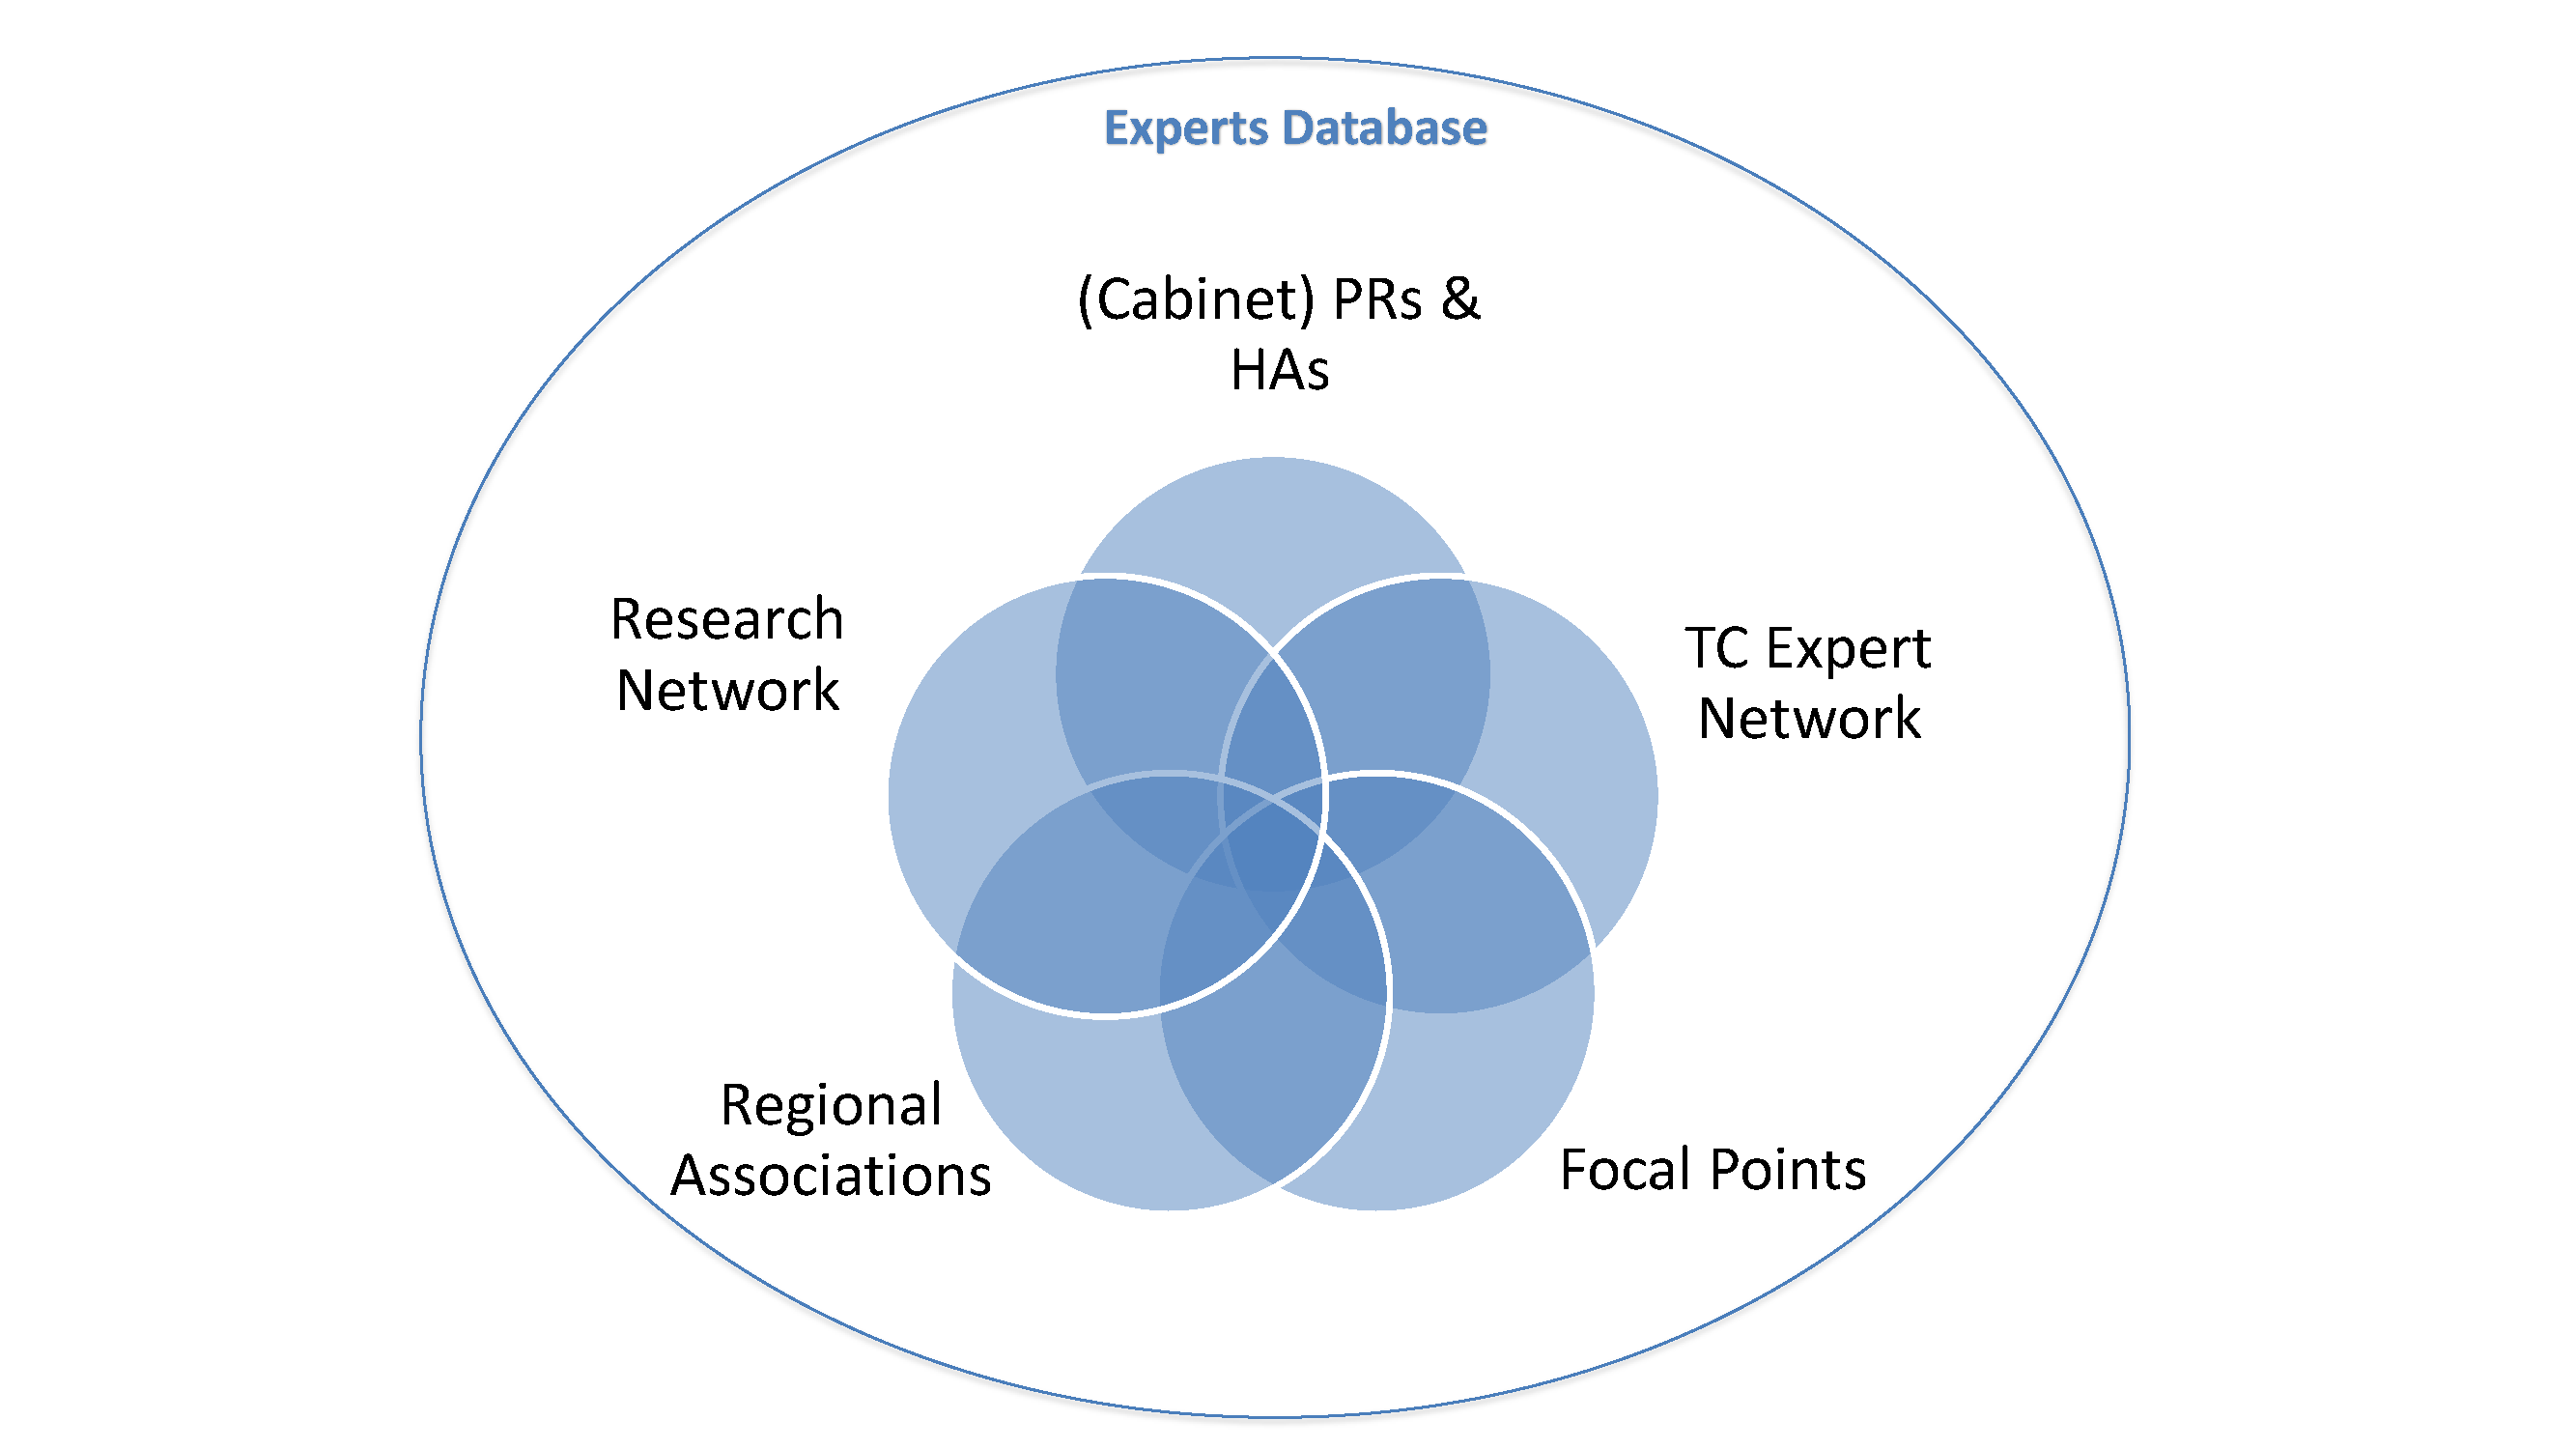 Structure of the WMO Experts Database